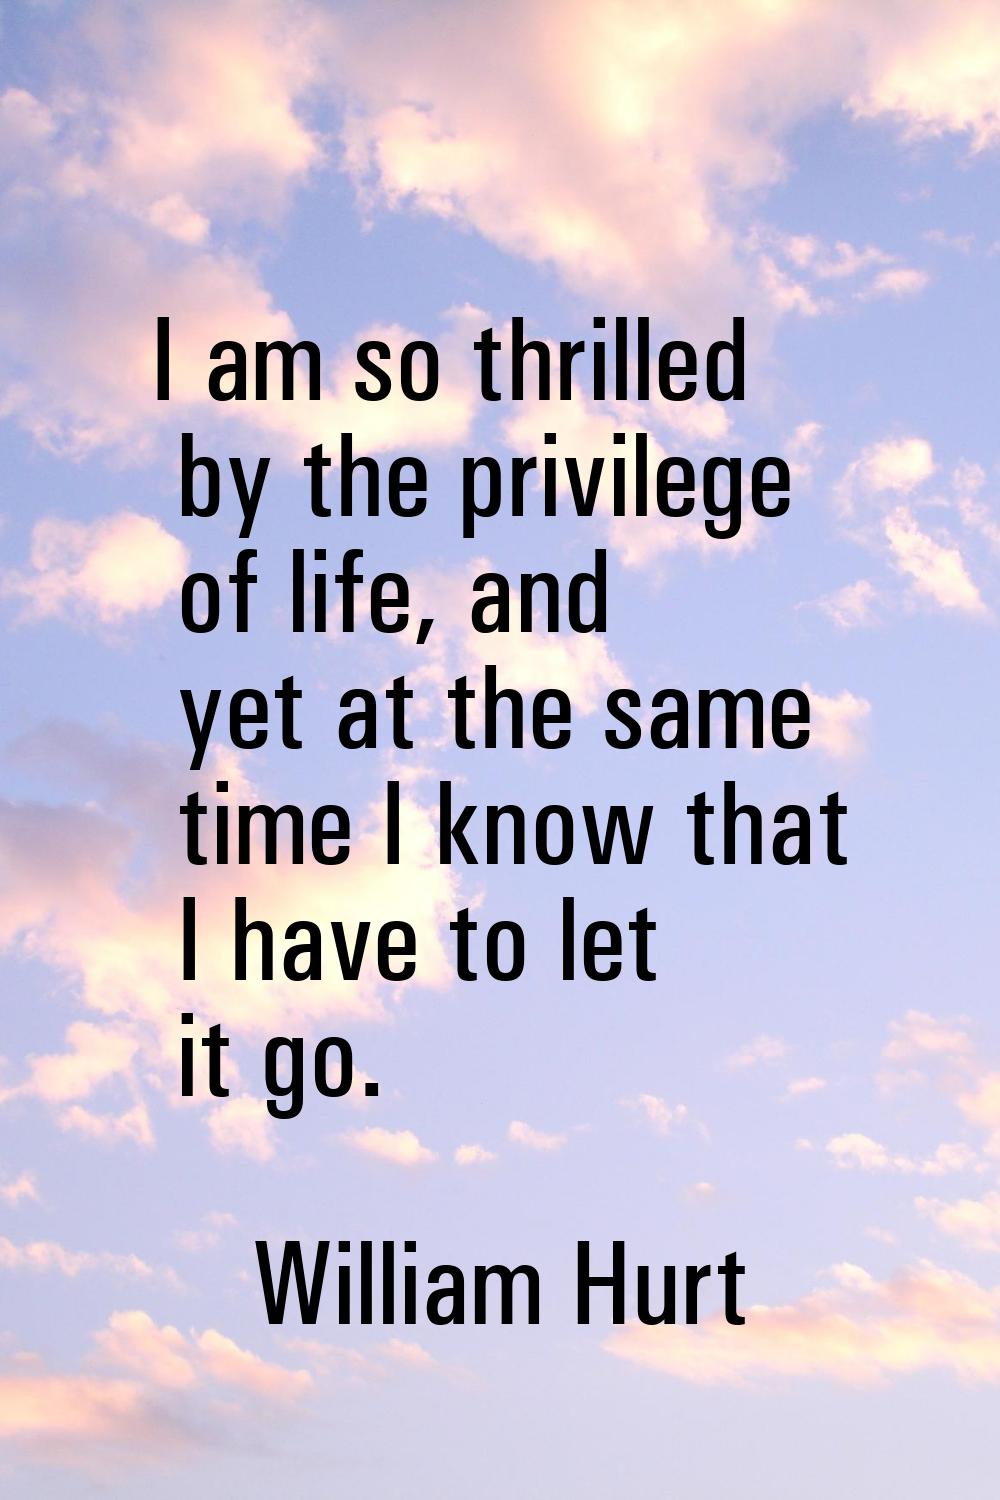 I am so thrilled by the privilege of life, and yet at the same time I know that I have to let it go